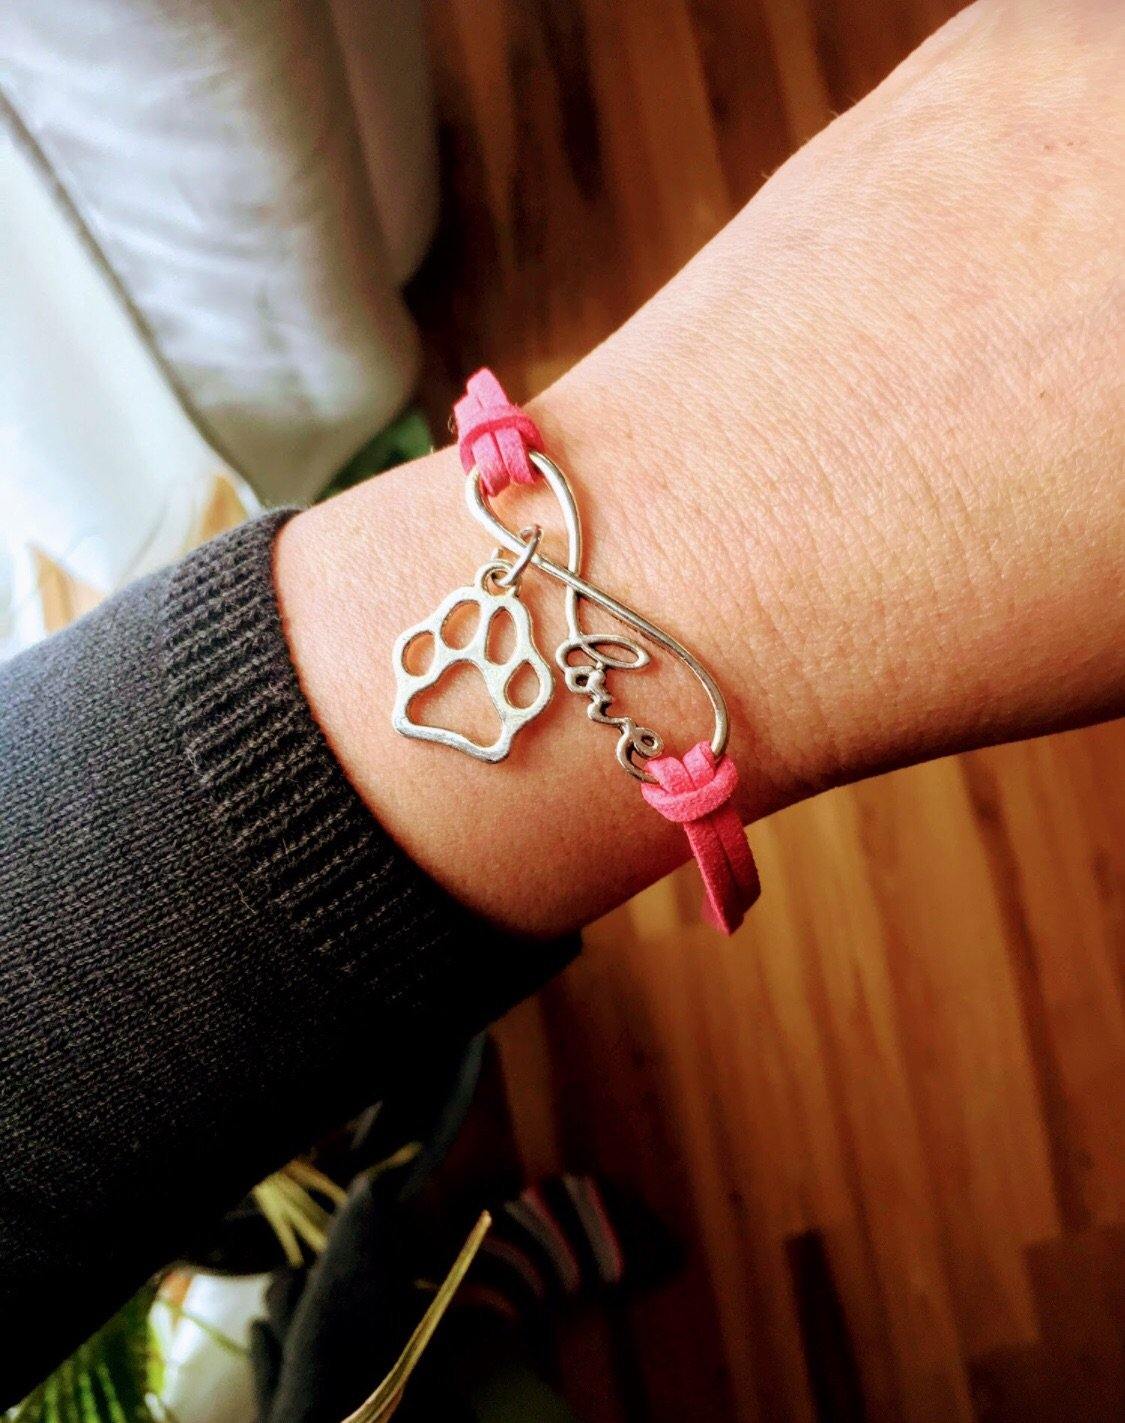 Bracelet { Paw } Adjustable with extender. Assorted colors. - Stacy's Pink Martini Boutique